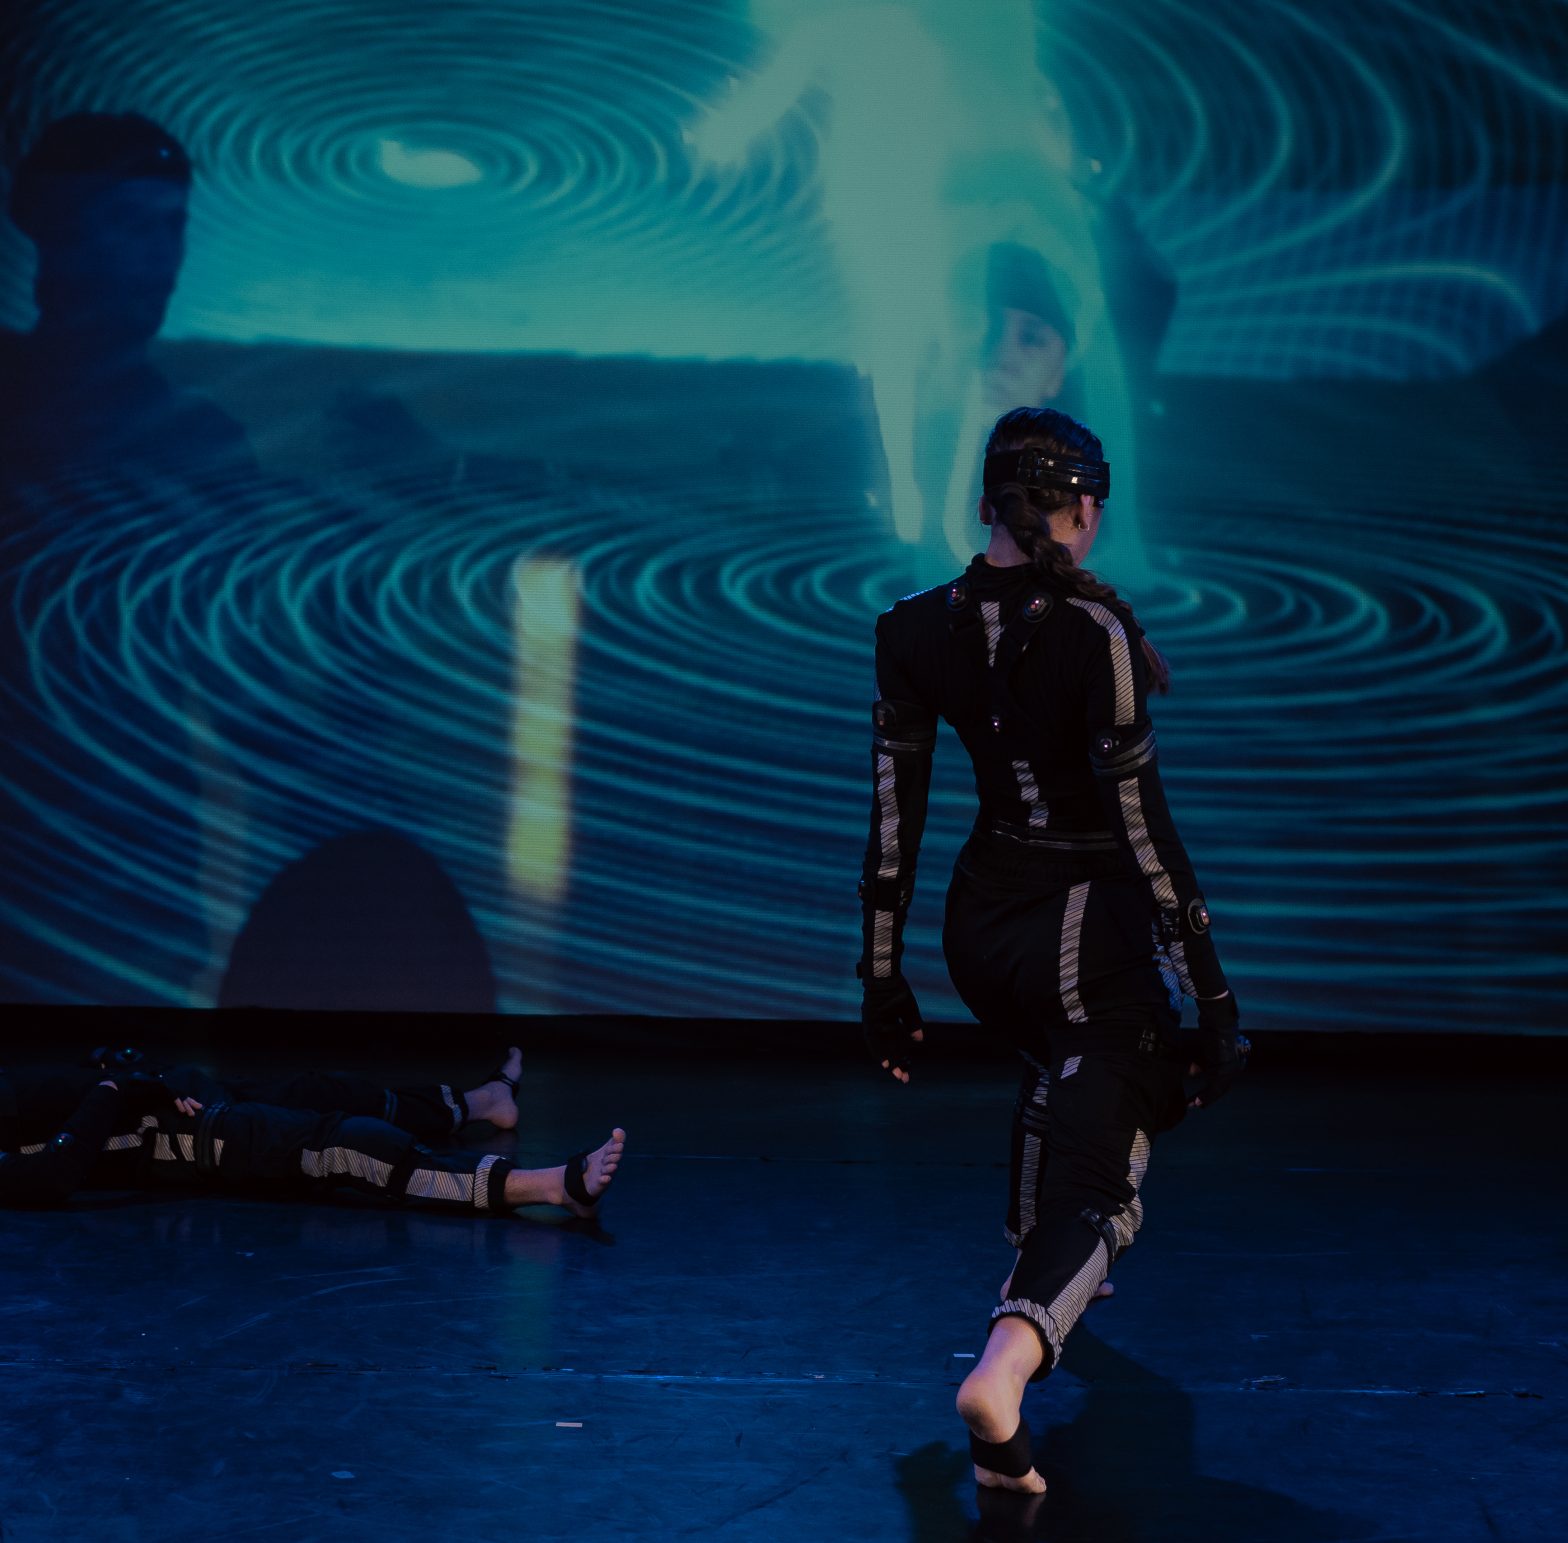 One dancer lies on the floor as the other walks towards the back on the theatre. Both wear motion capture, their avatars projected behind them.